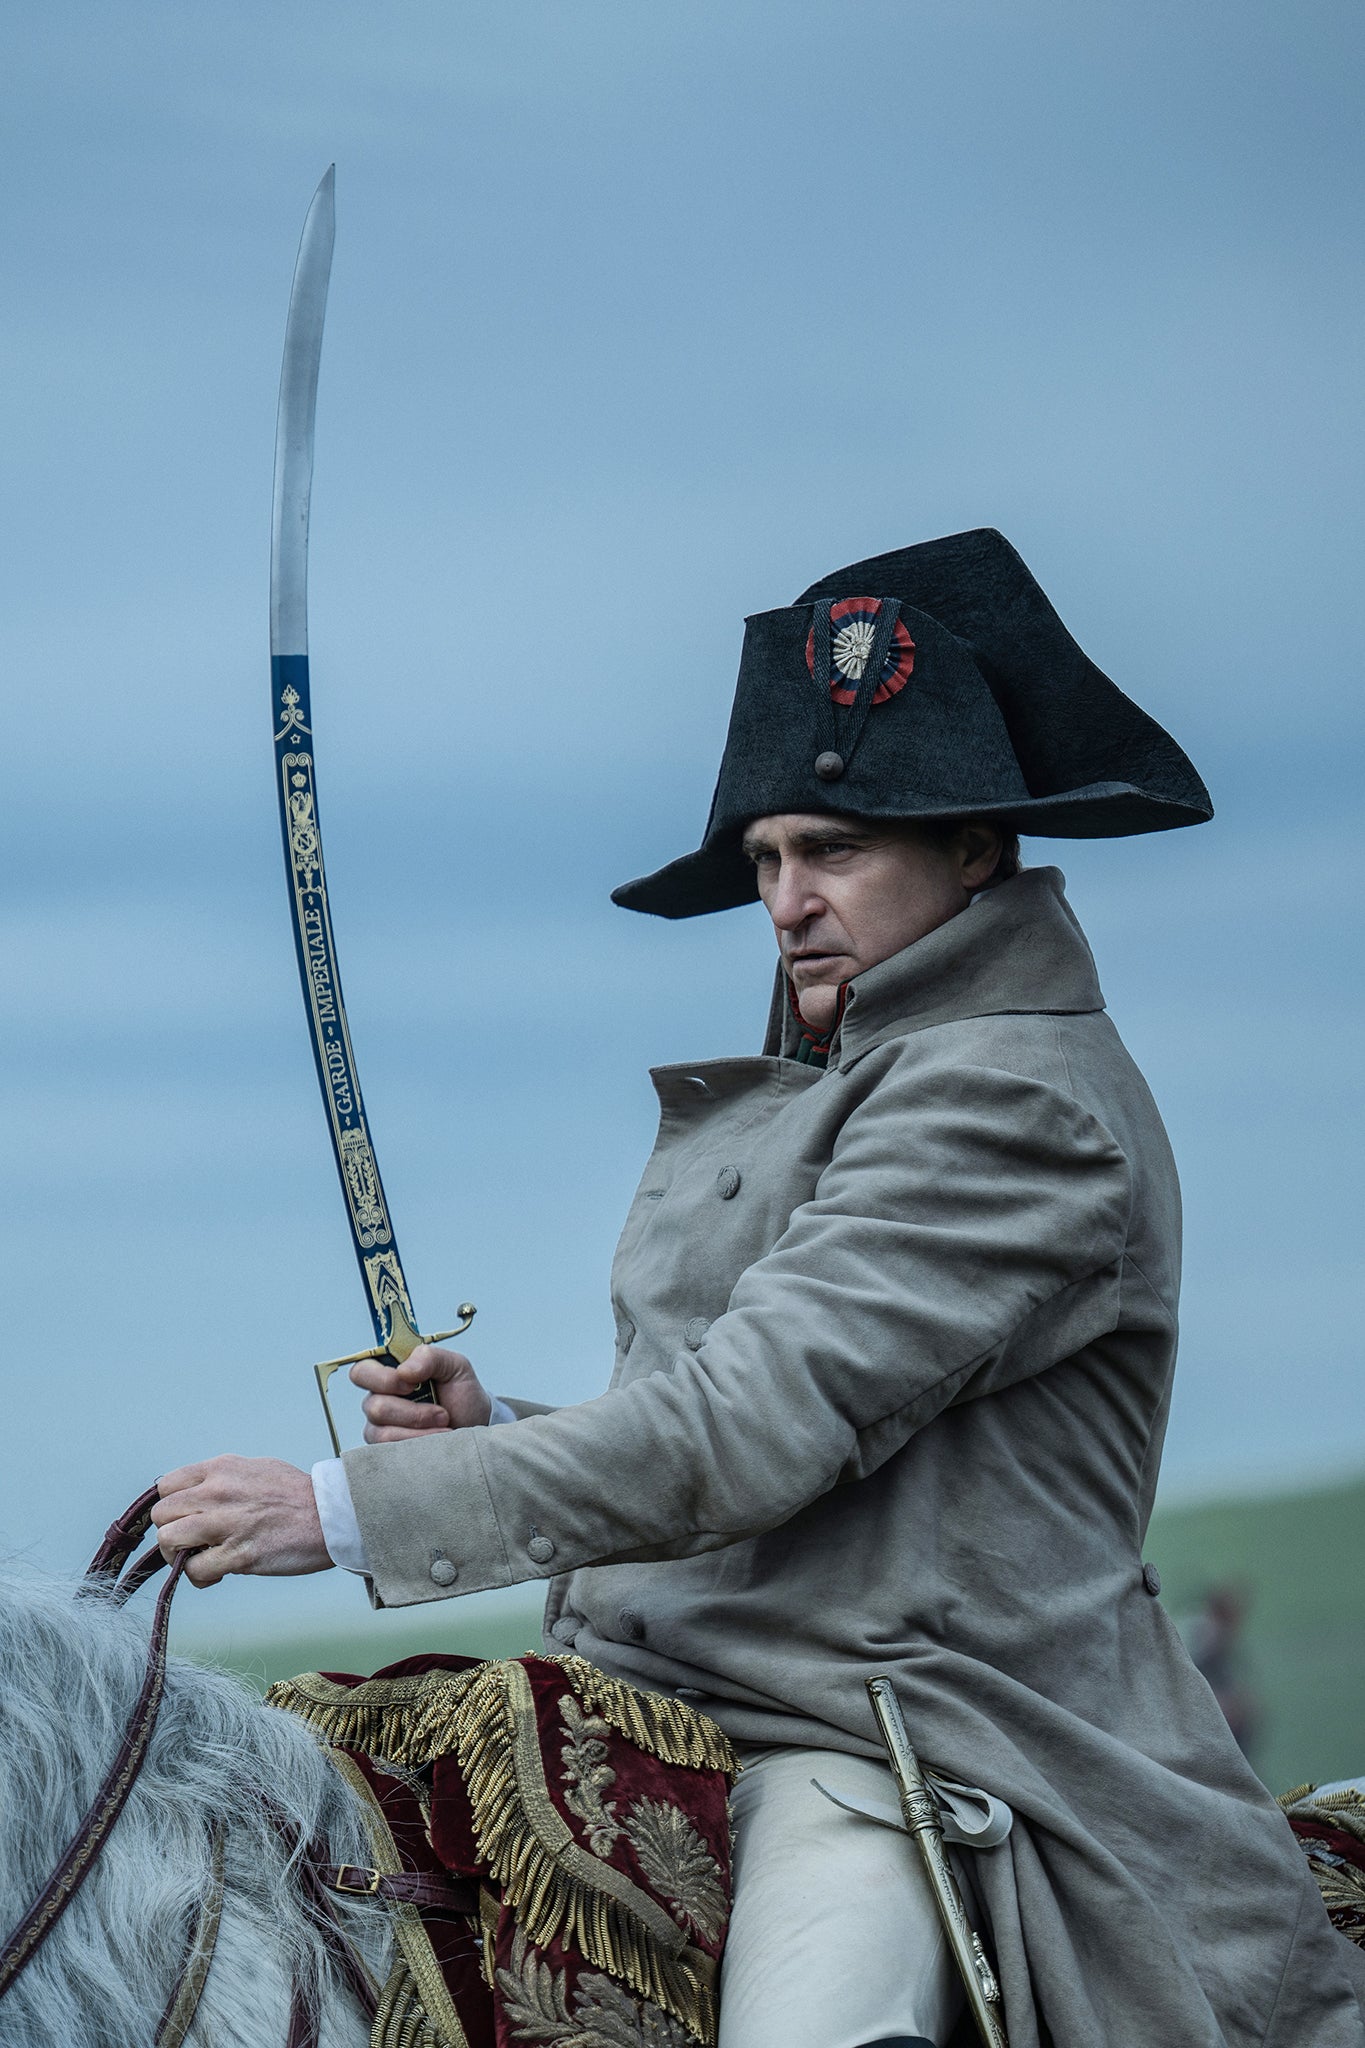 Joaquin Phoenix in ‘Napoleon’, which is released on November 24 in the UK